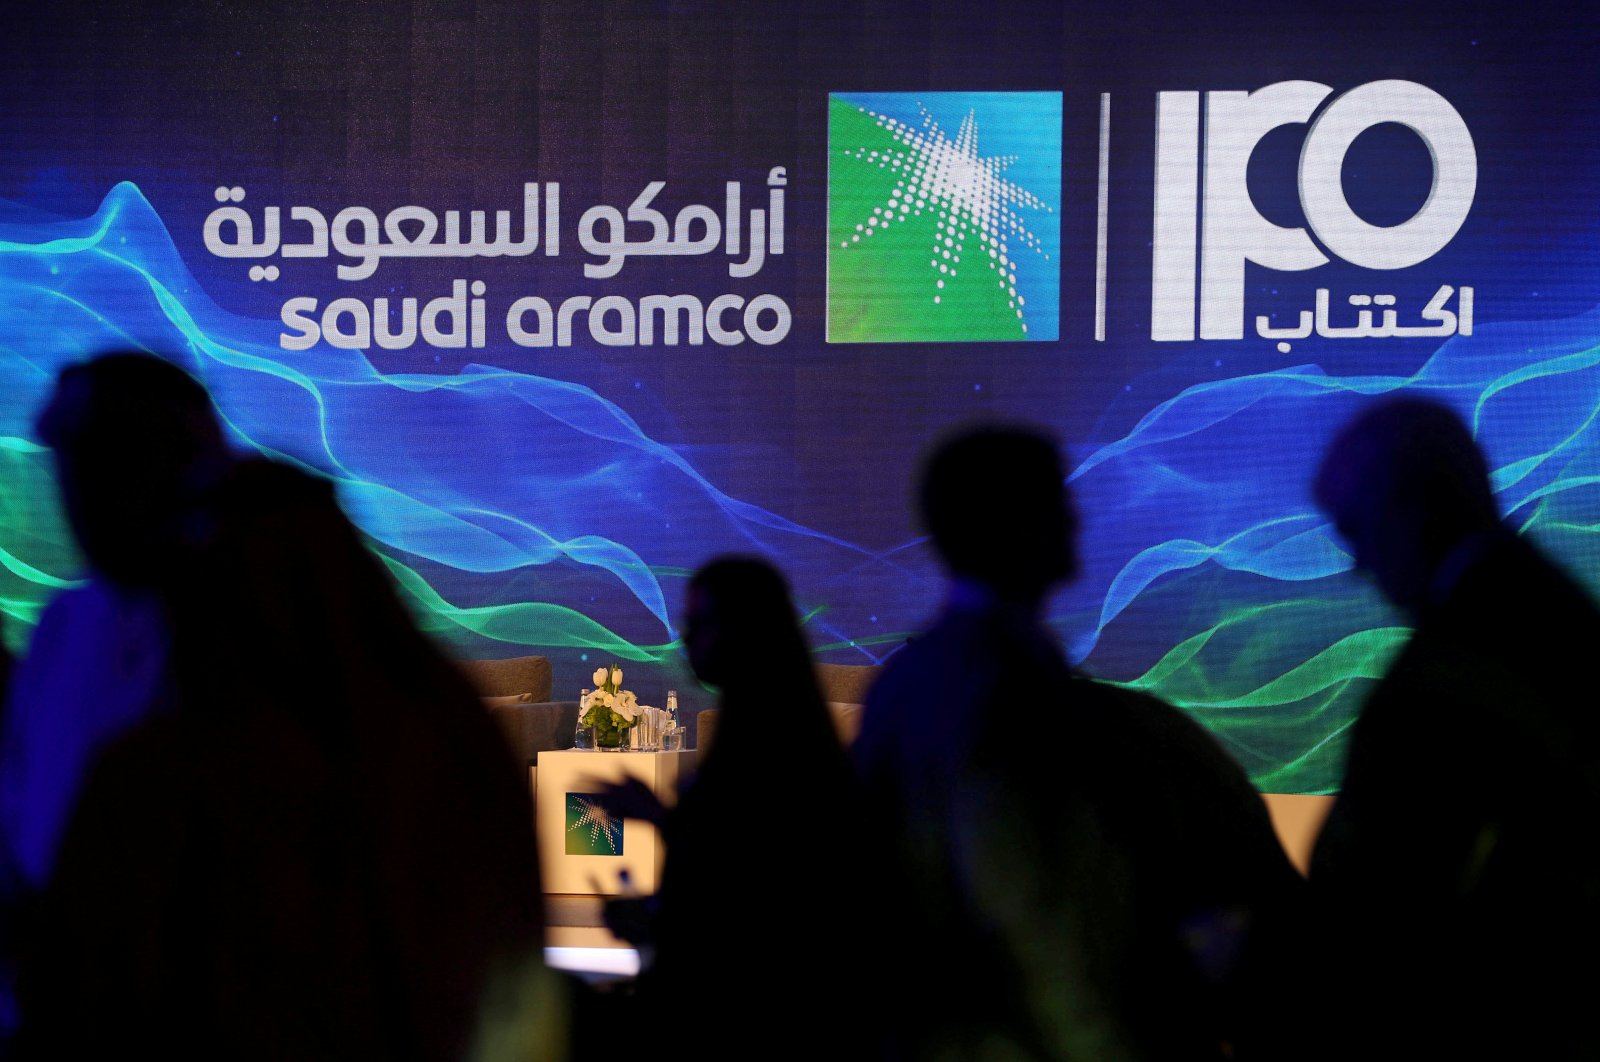 The logo of Saudi Aramco's initial public offering (IPO) is seen during a news conference by the state oil company at the Plaza Conference Center in Dhahran, Saudi Arabia Nov. 3, 2019. (Reuters Photo)